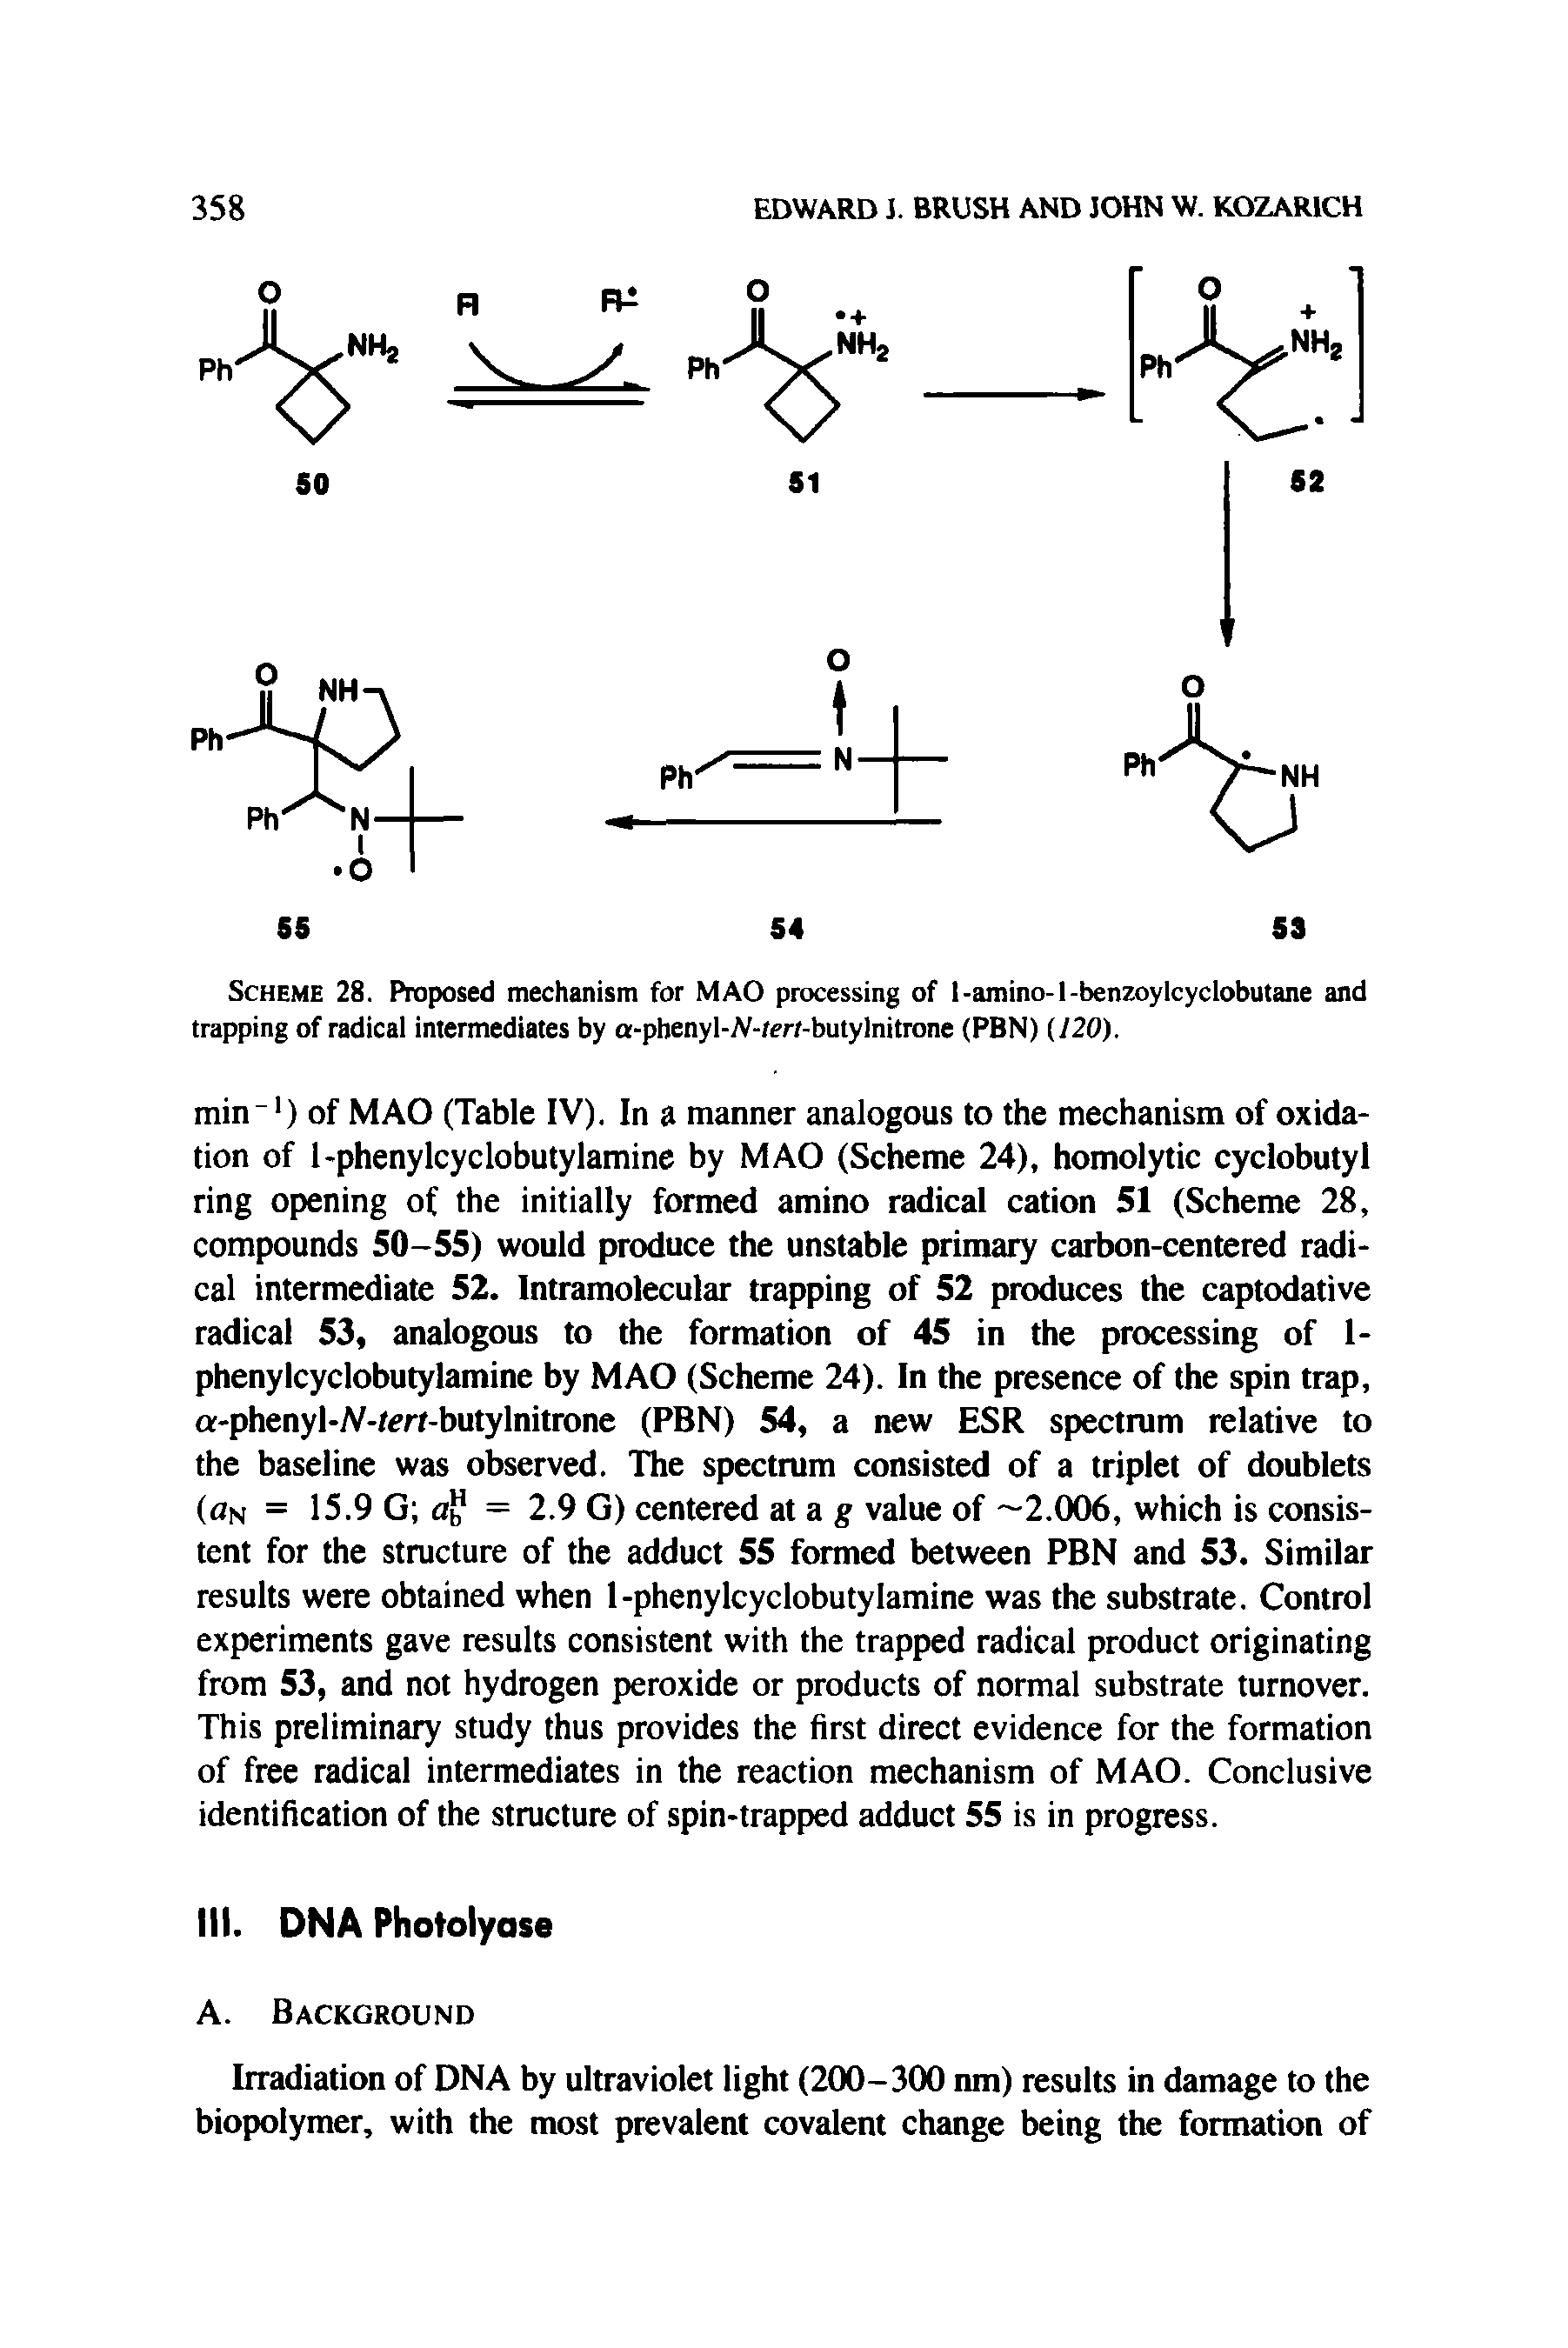 Scheme 28. Proposed mechanism for MAO processing of t-amino-l-benzoylcyclobutane and trapping of radical intermediates by a-phenyl-A-/m-butylnitrone (PBN) (J20).